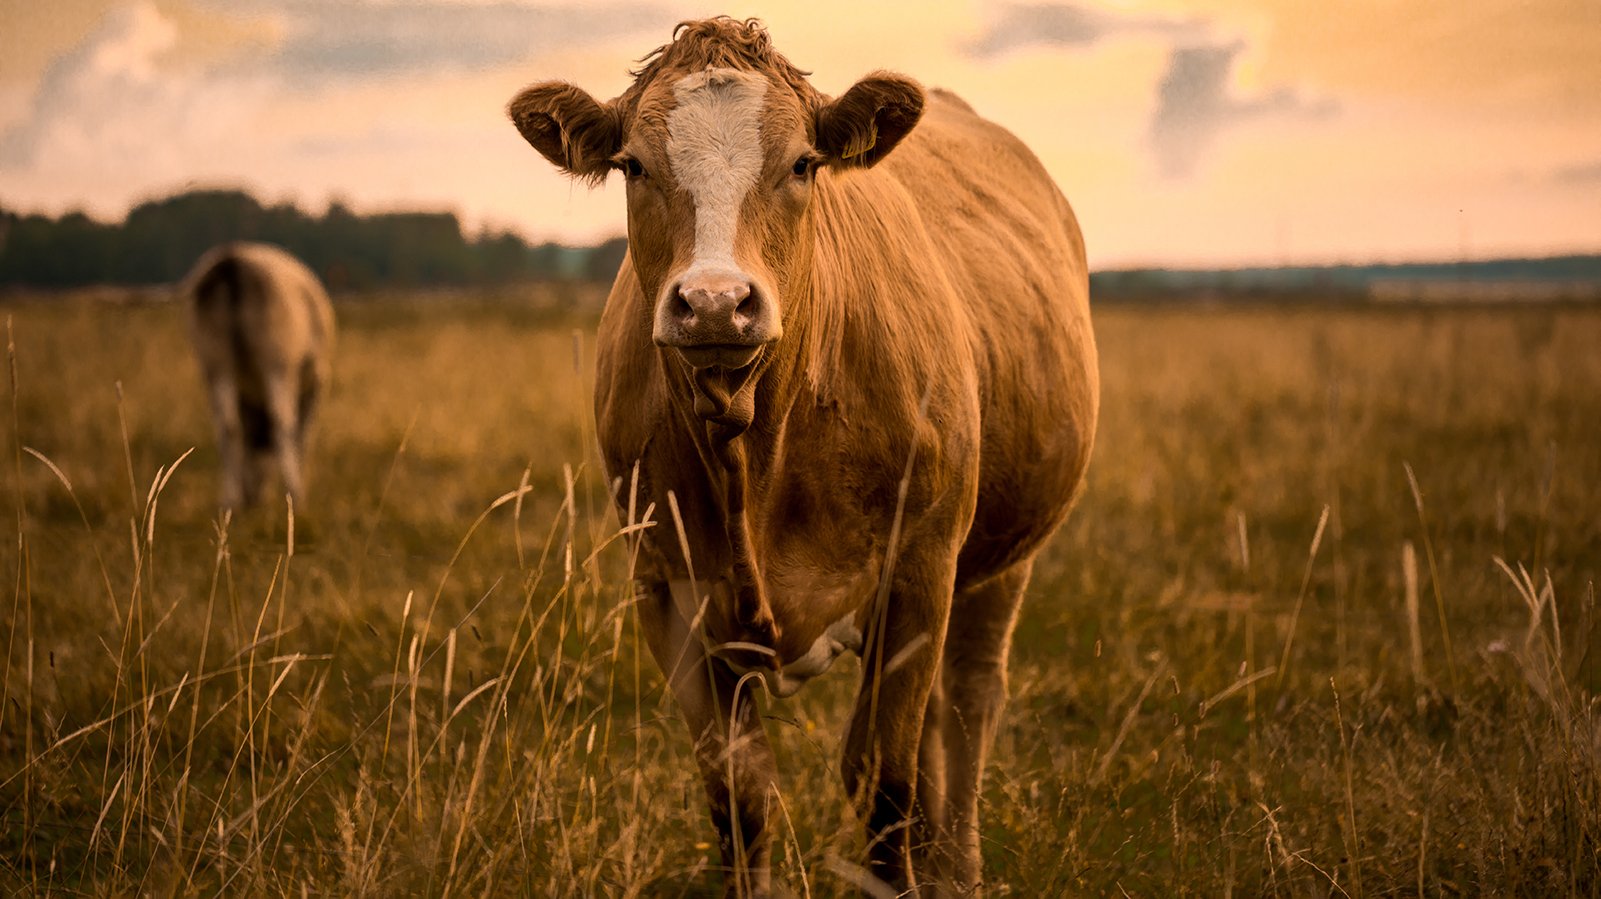 Animal Agriculture Responsible For 87% Of Greenhouse Gas Emissions, Finds New Report